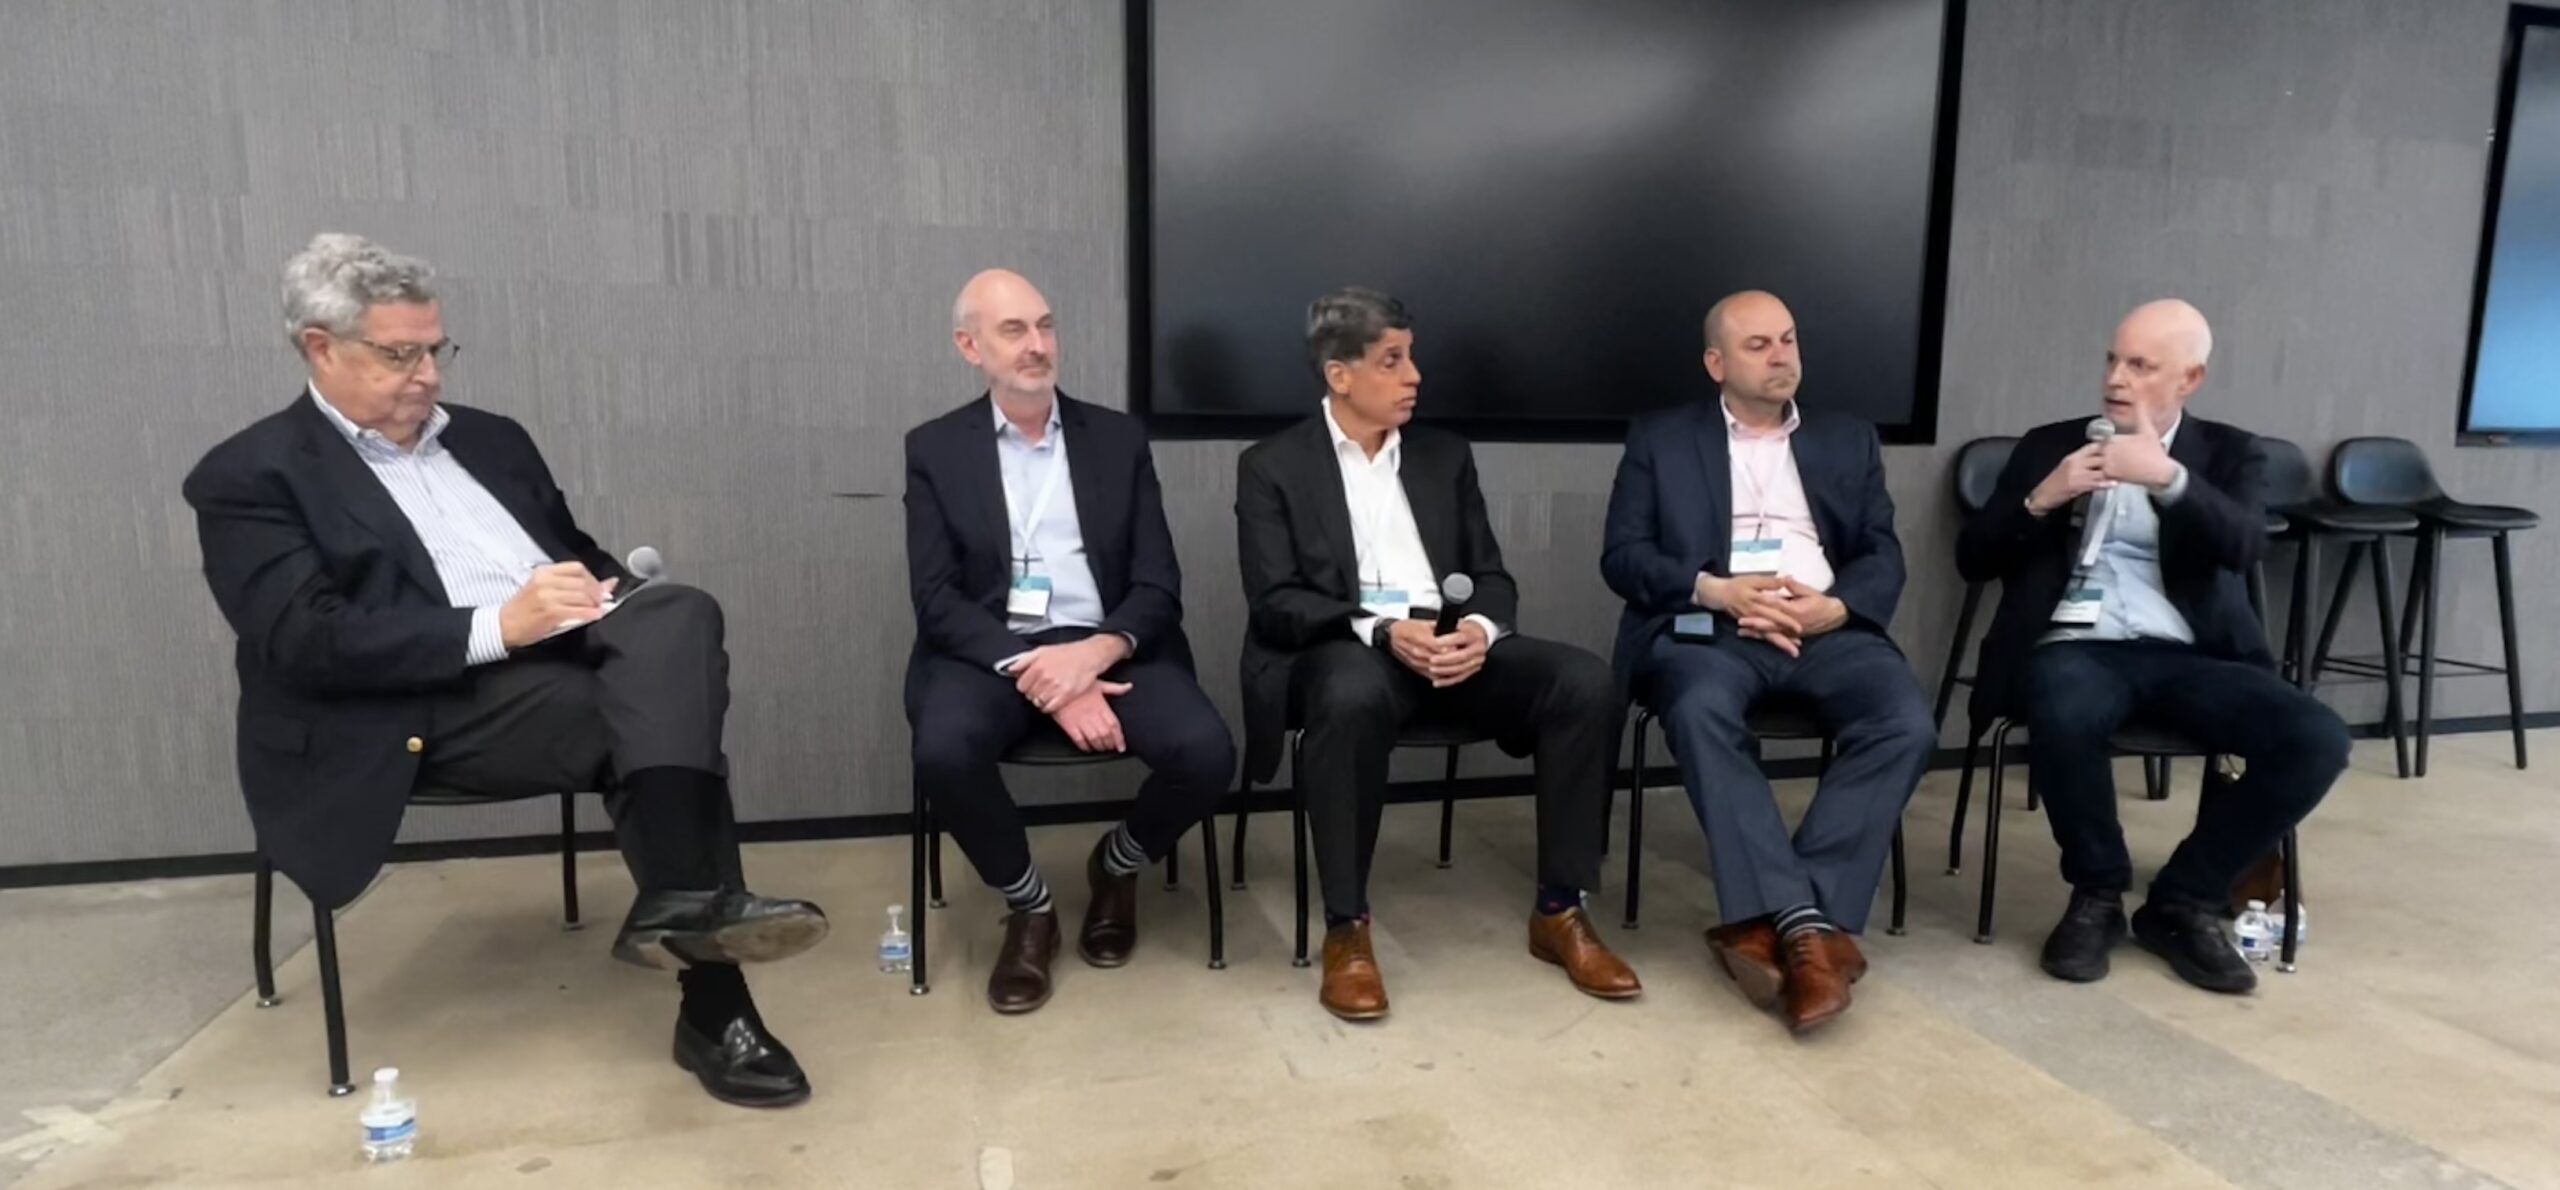 AEC Angels founding members discuss industry innovation at BuiltWorlds' 2024 Buildings Conference. From left to right: Grant McCullagh, Rob Leon, Tom Scarangello, Robert Ioanna and William Sharples.